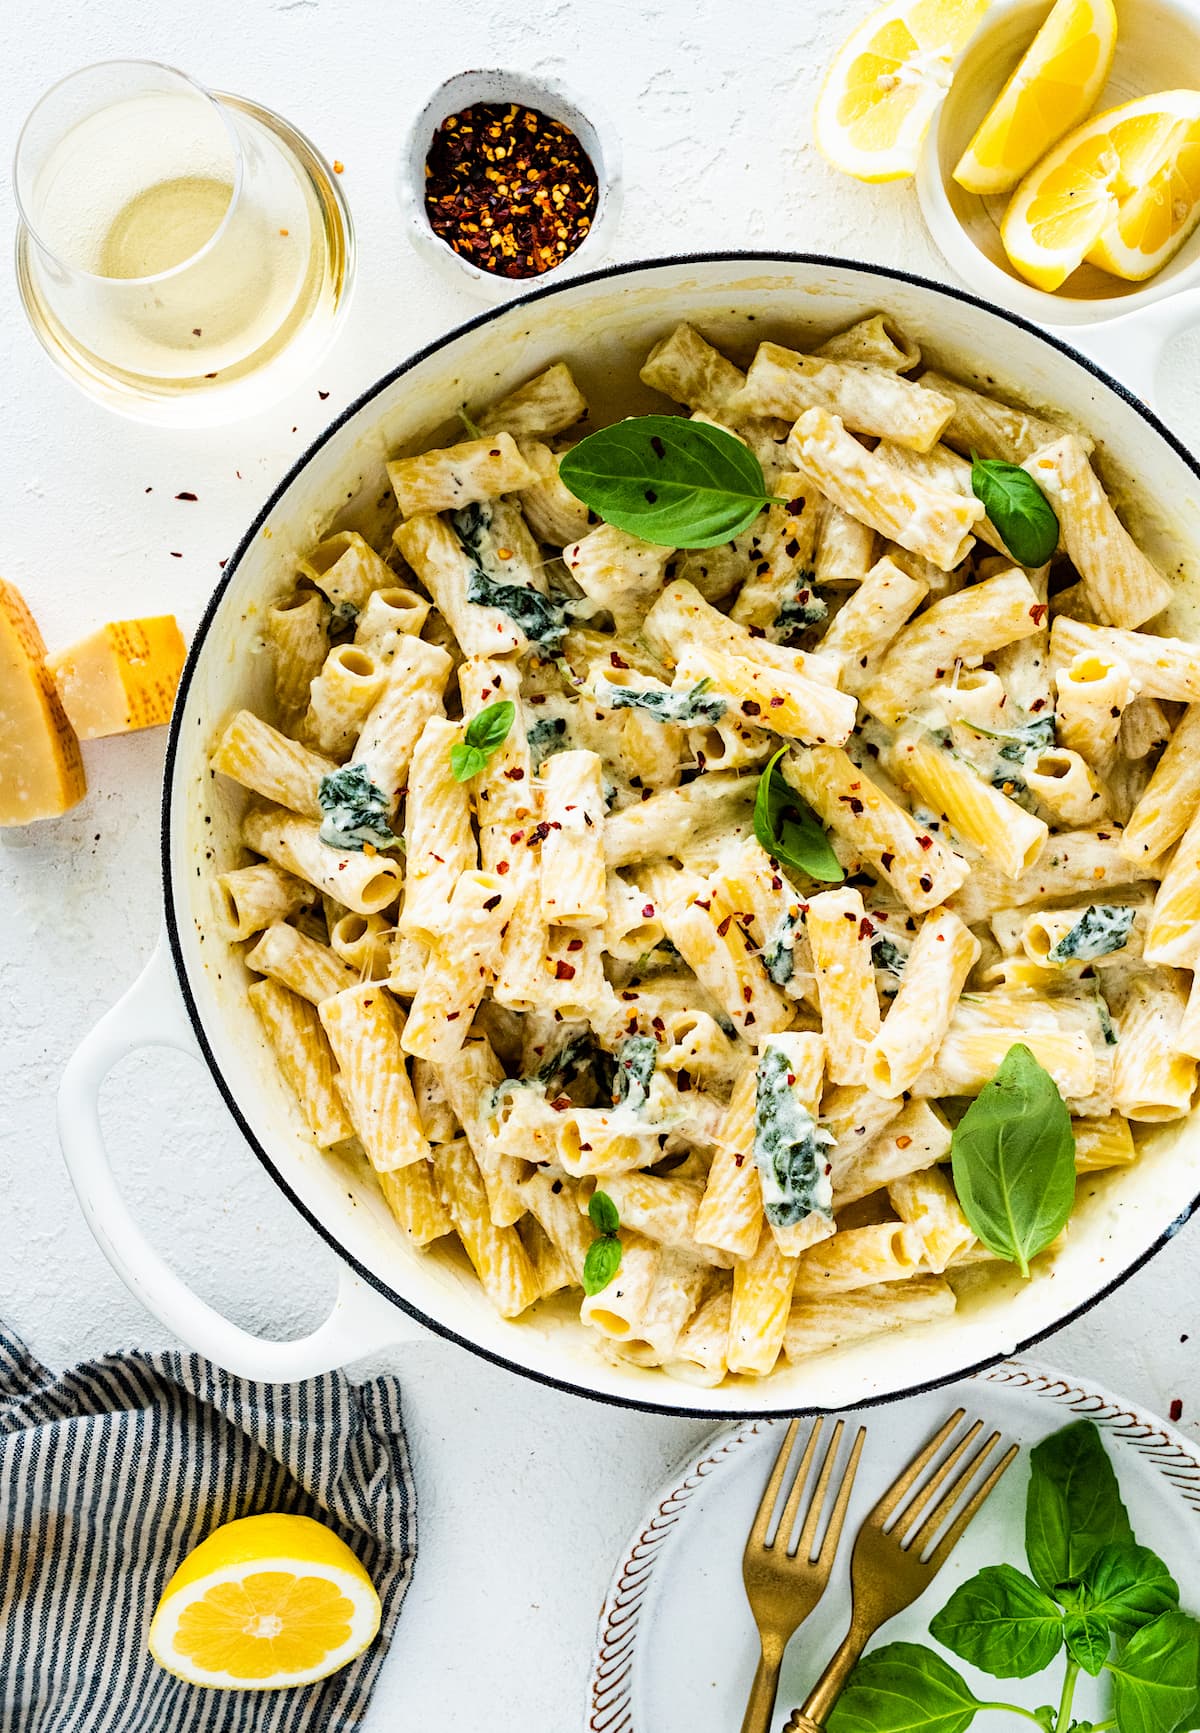 Penne With Spinach and Ricotta Recipe